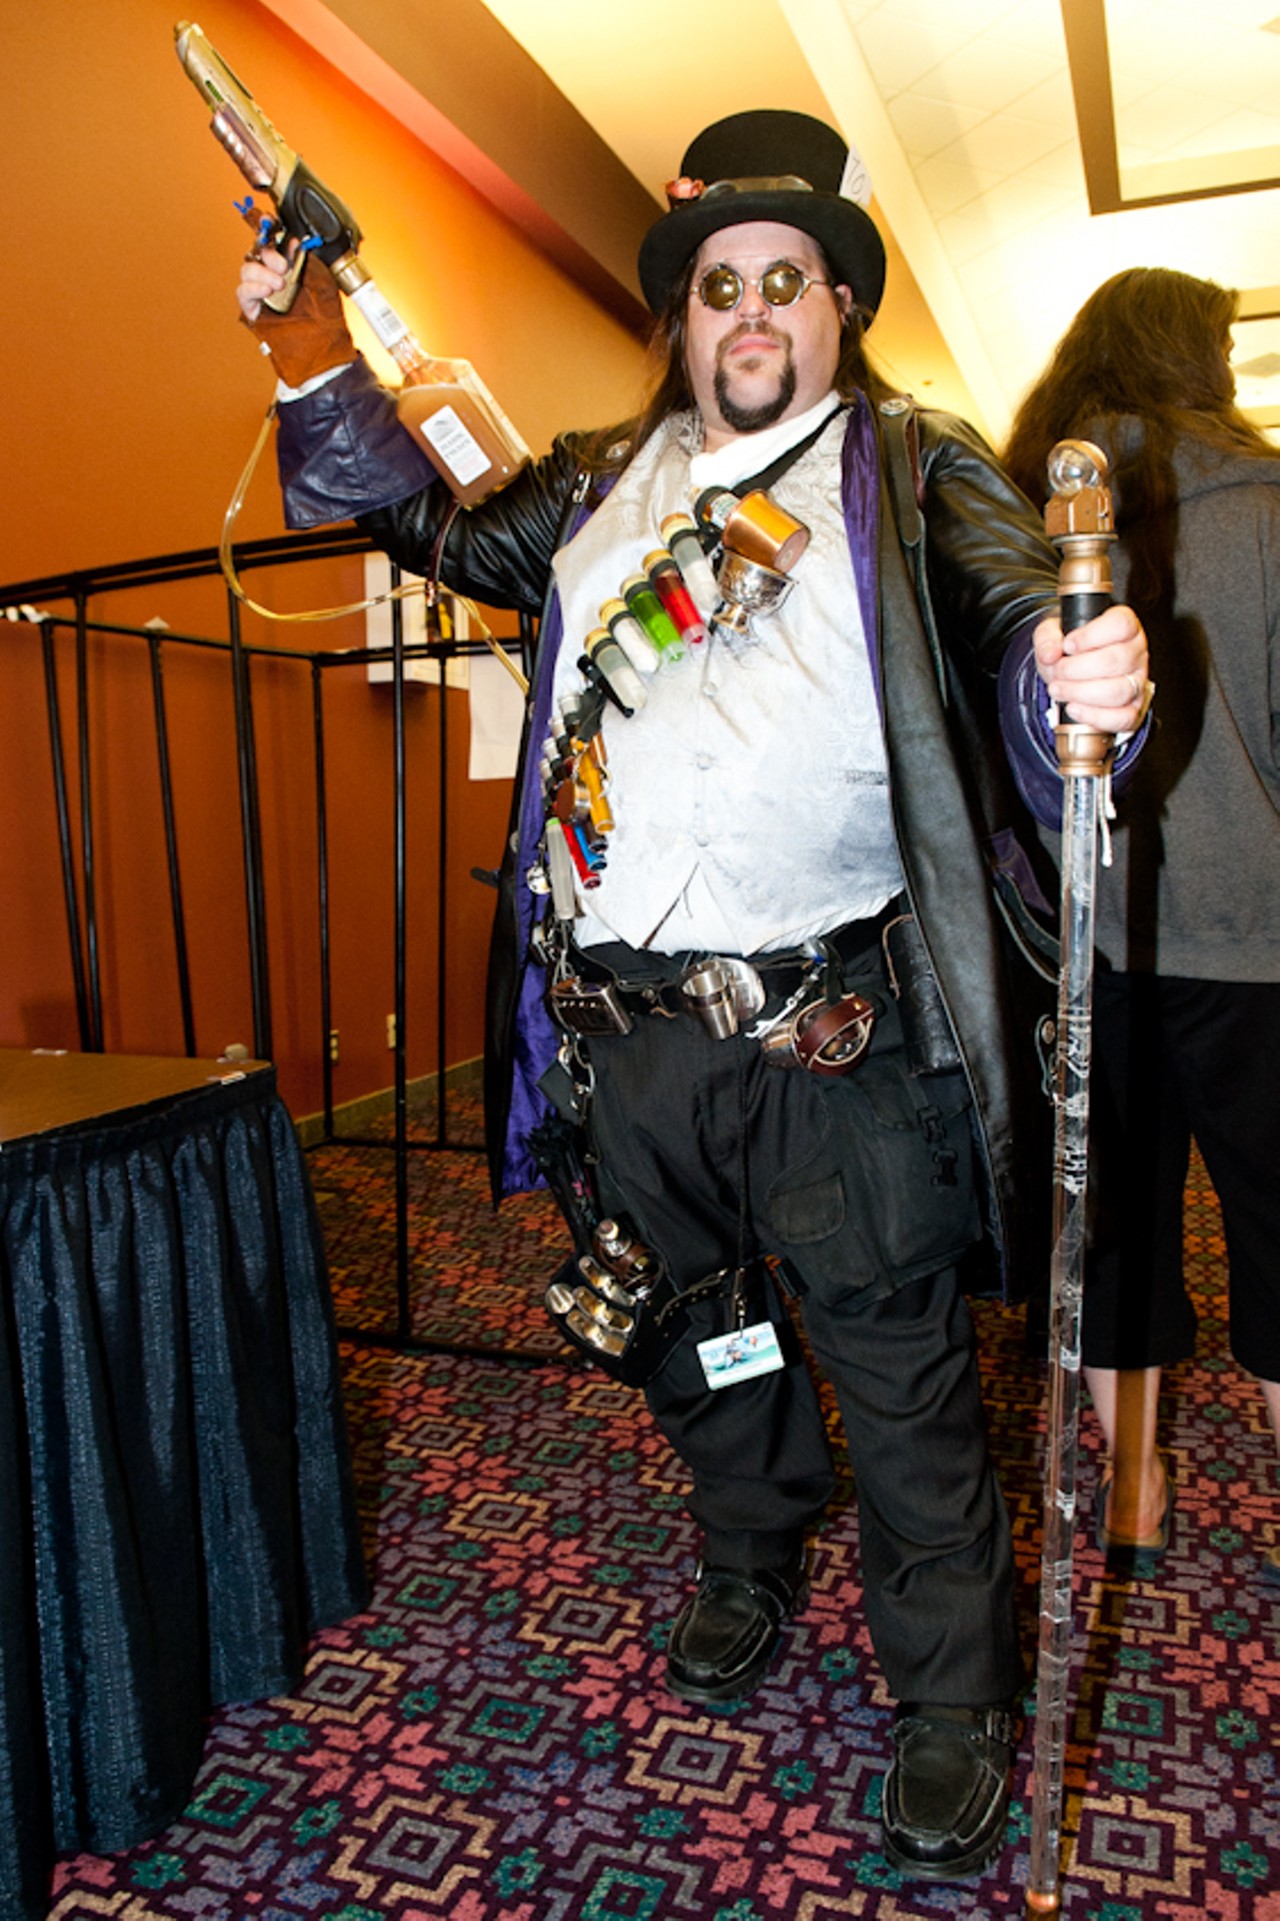 An Archon attendee posing for a quick photo in the Doubletree Hotel in Collinsville, Illinois, on September 30, 2011.